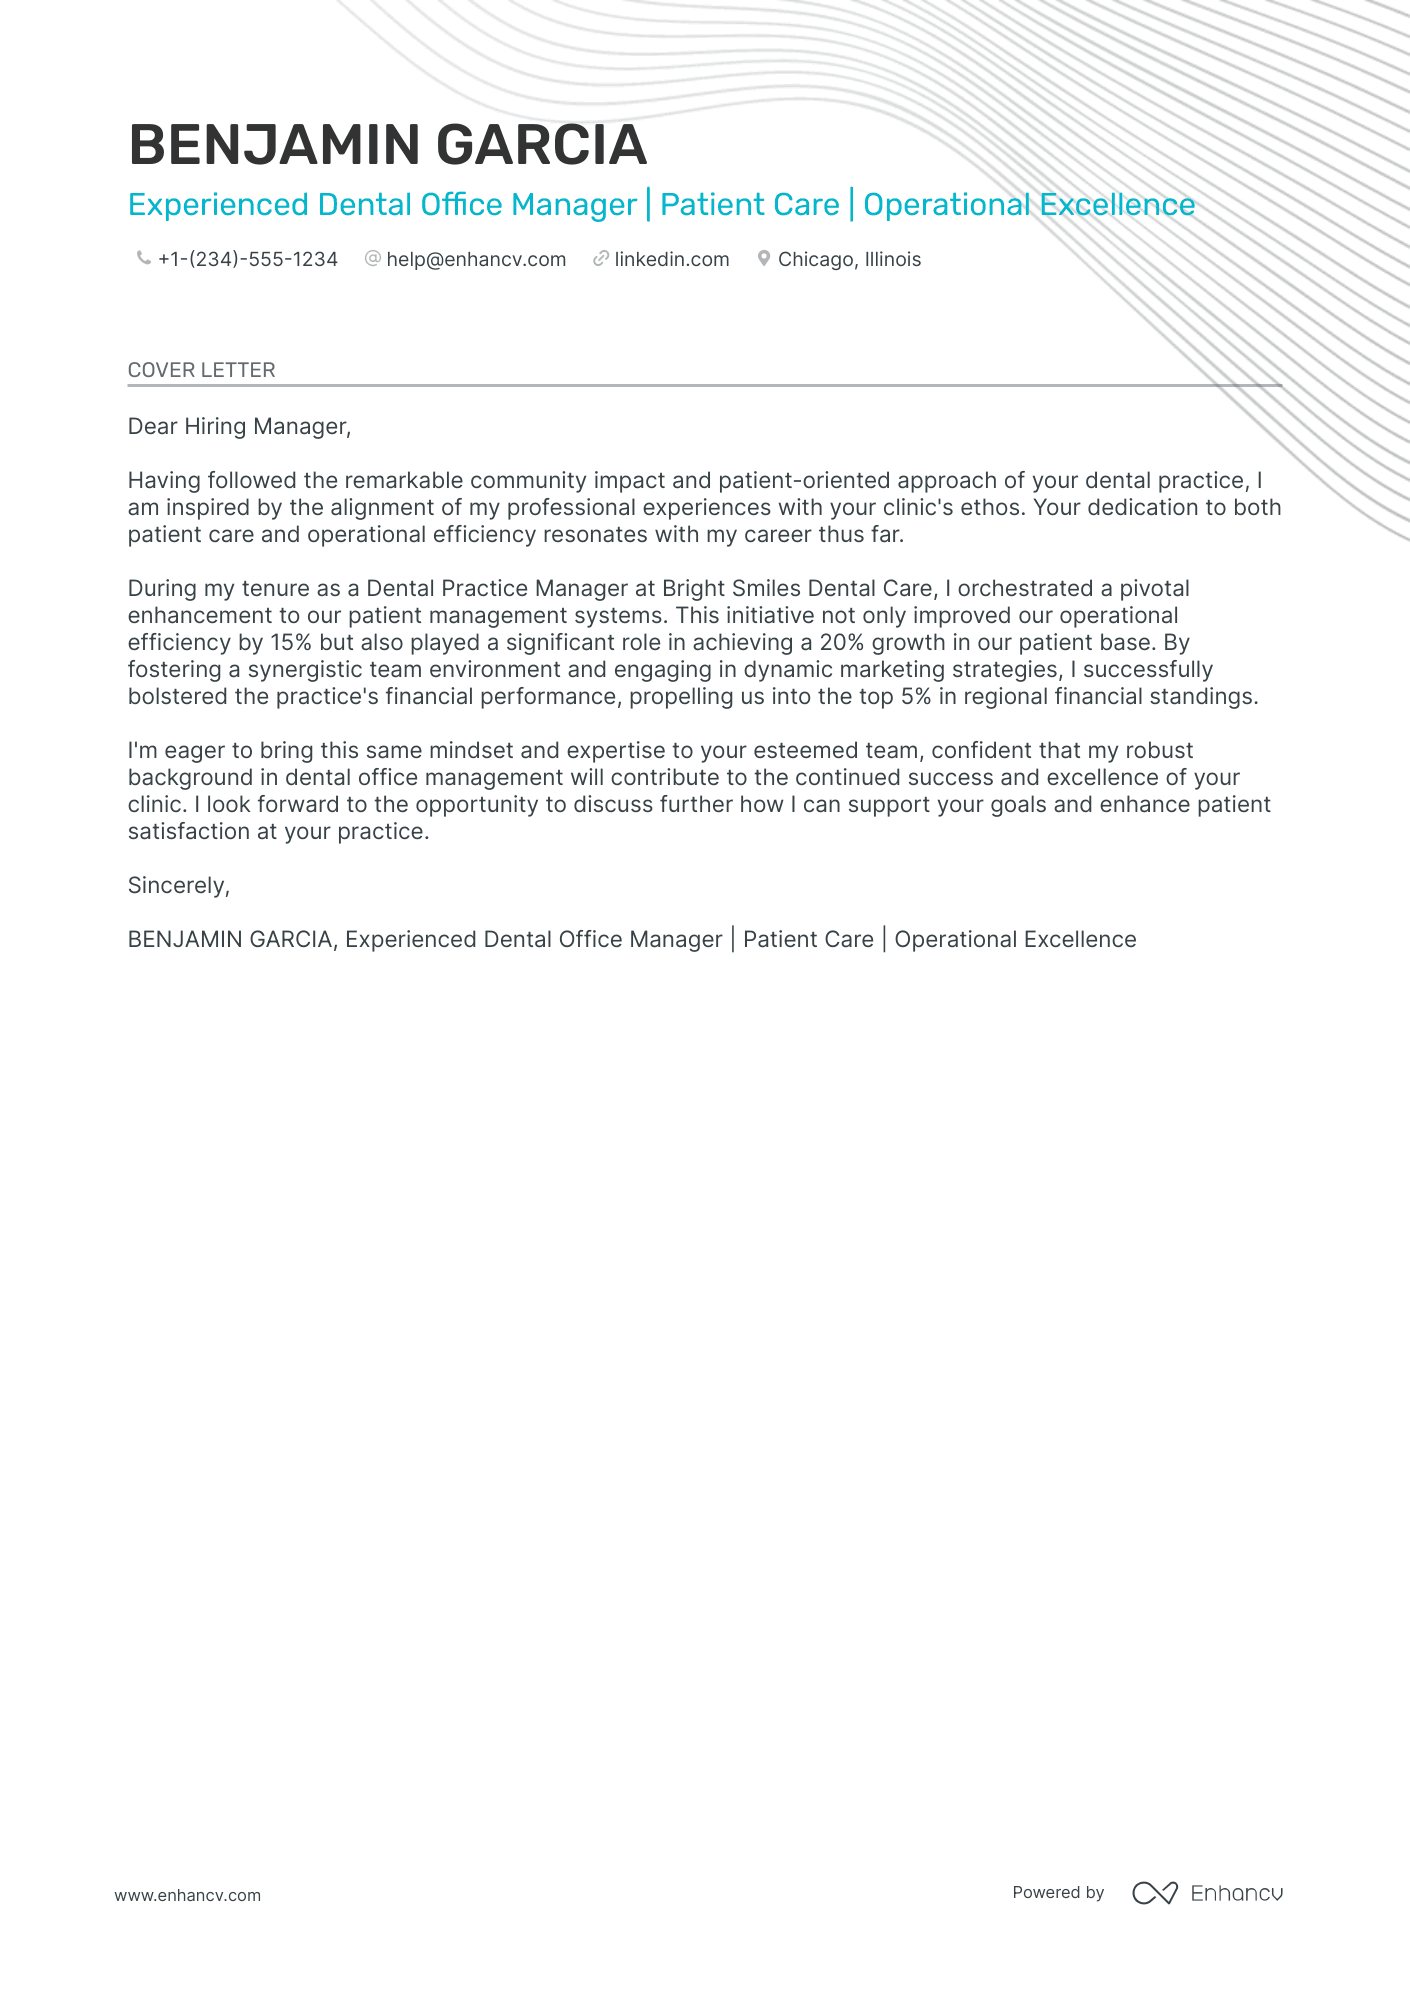 cover letter template office manager